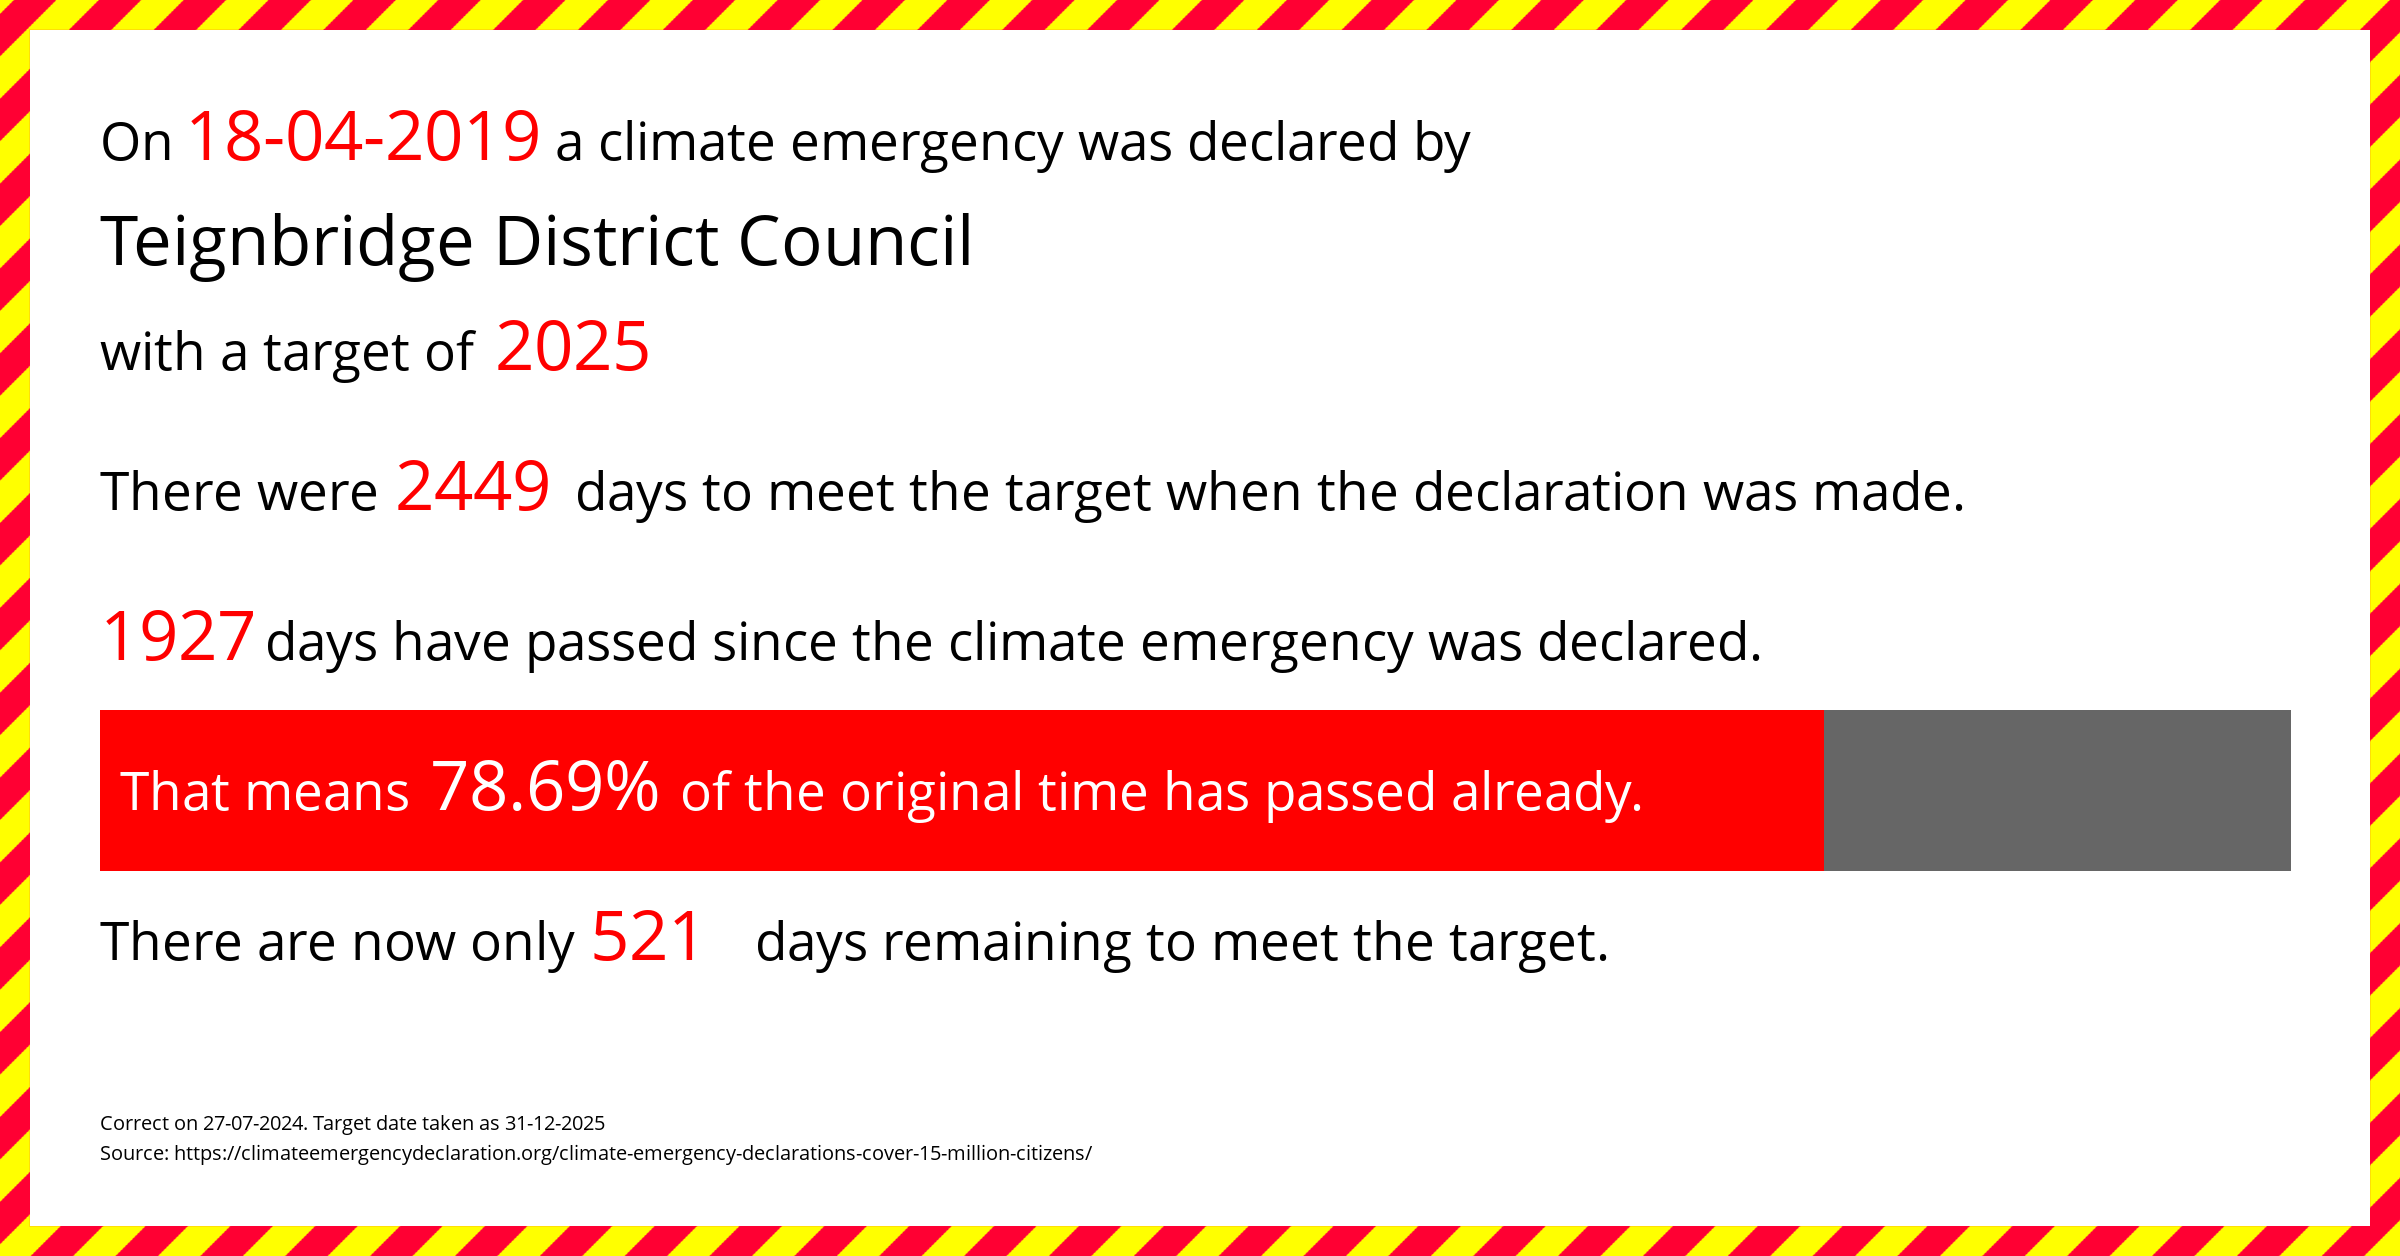 Teignbridge District Council declared a Climate emergency on Thursday 18th April 2019, with a target of 2025.